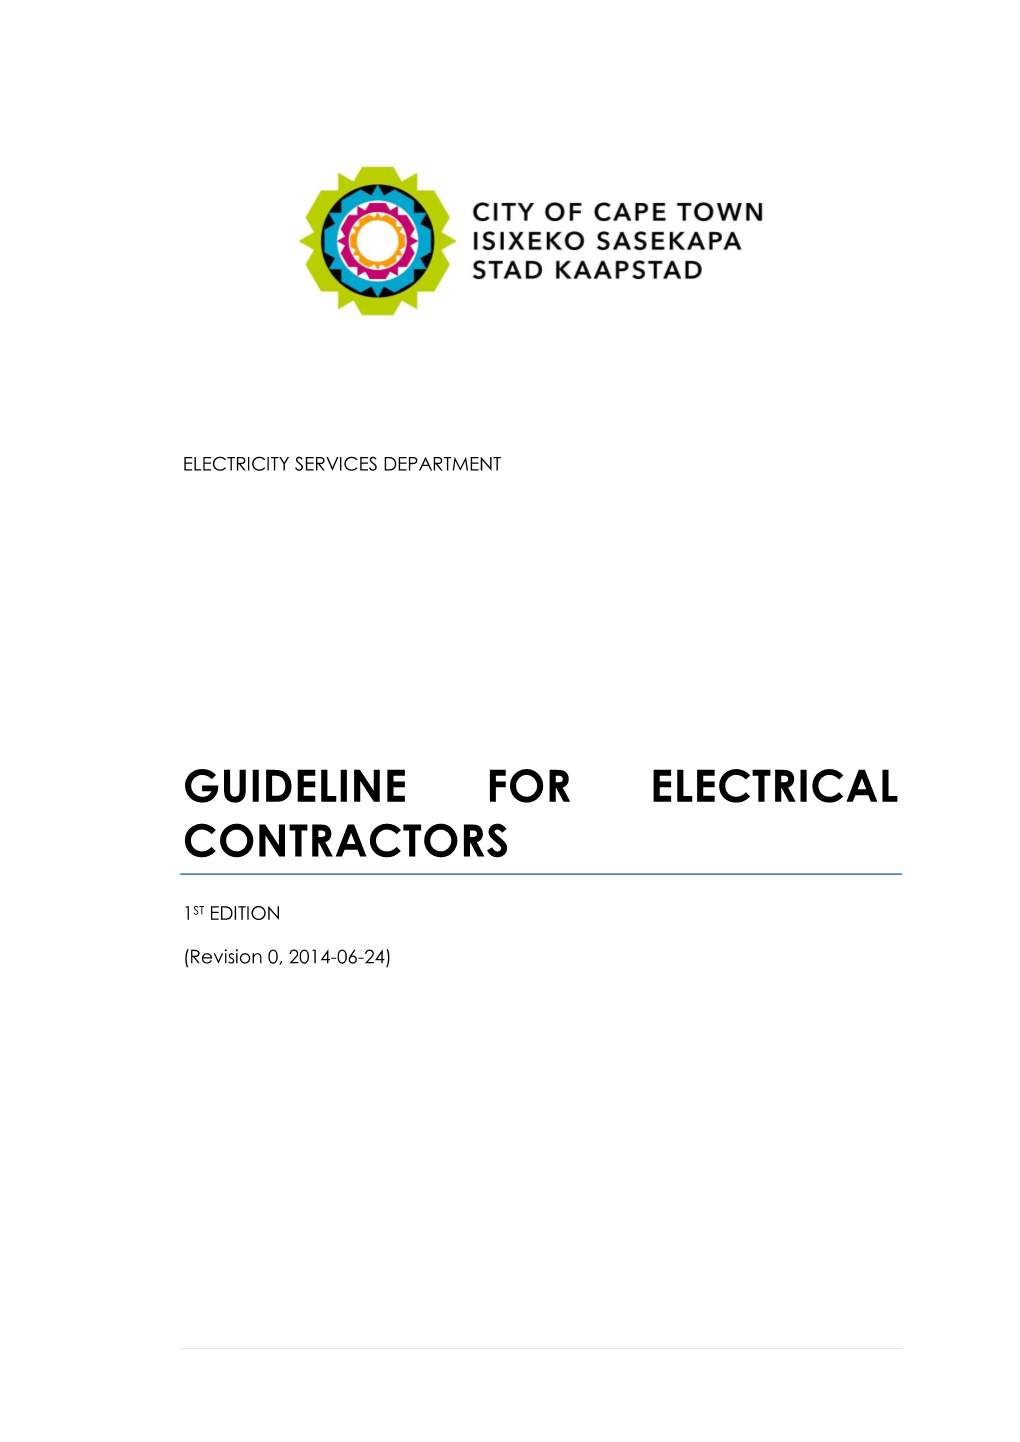 Guideline for Electrical Contractors